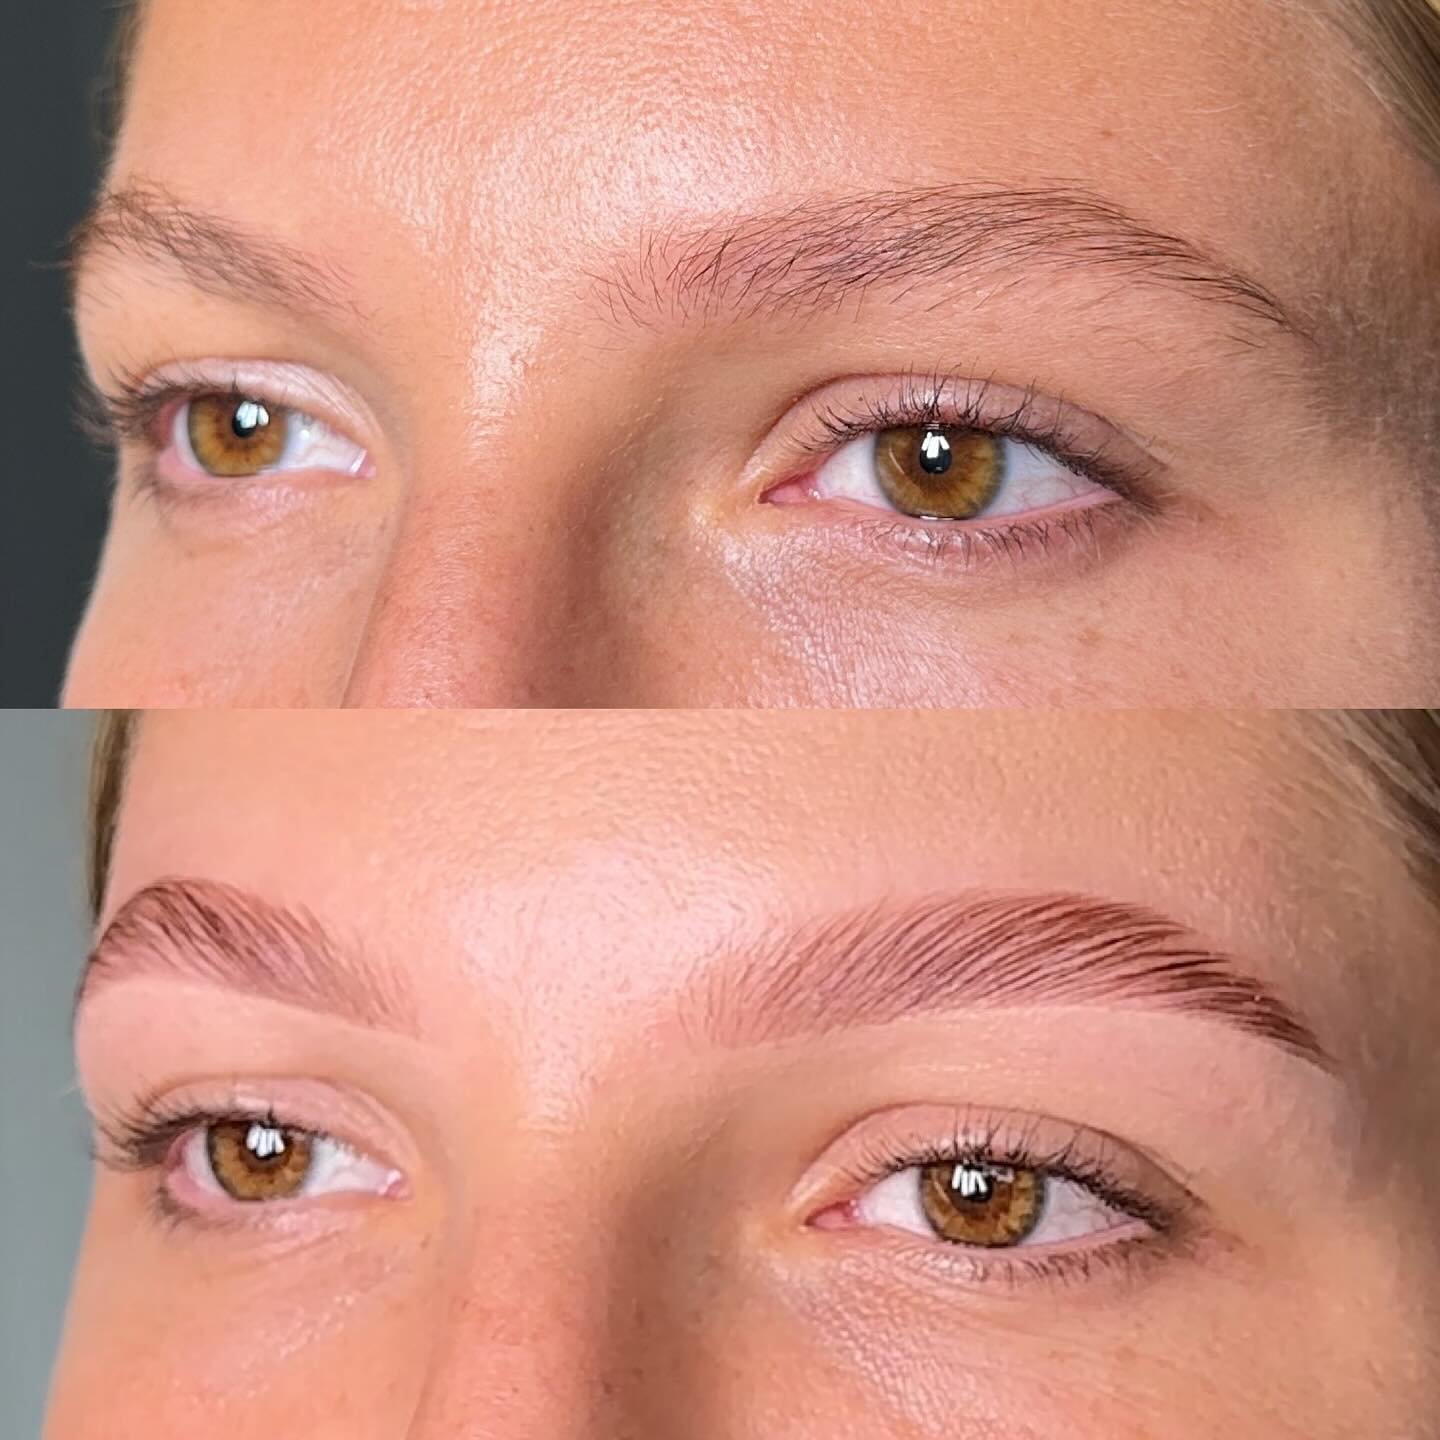 Before and after of our signature brow styling with lamination and hybrid dye service. Perfect for brows that refuse to sit right (literally every brow!).